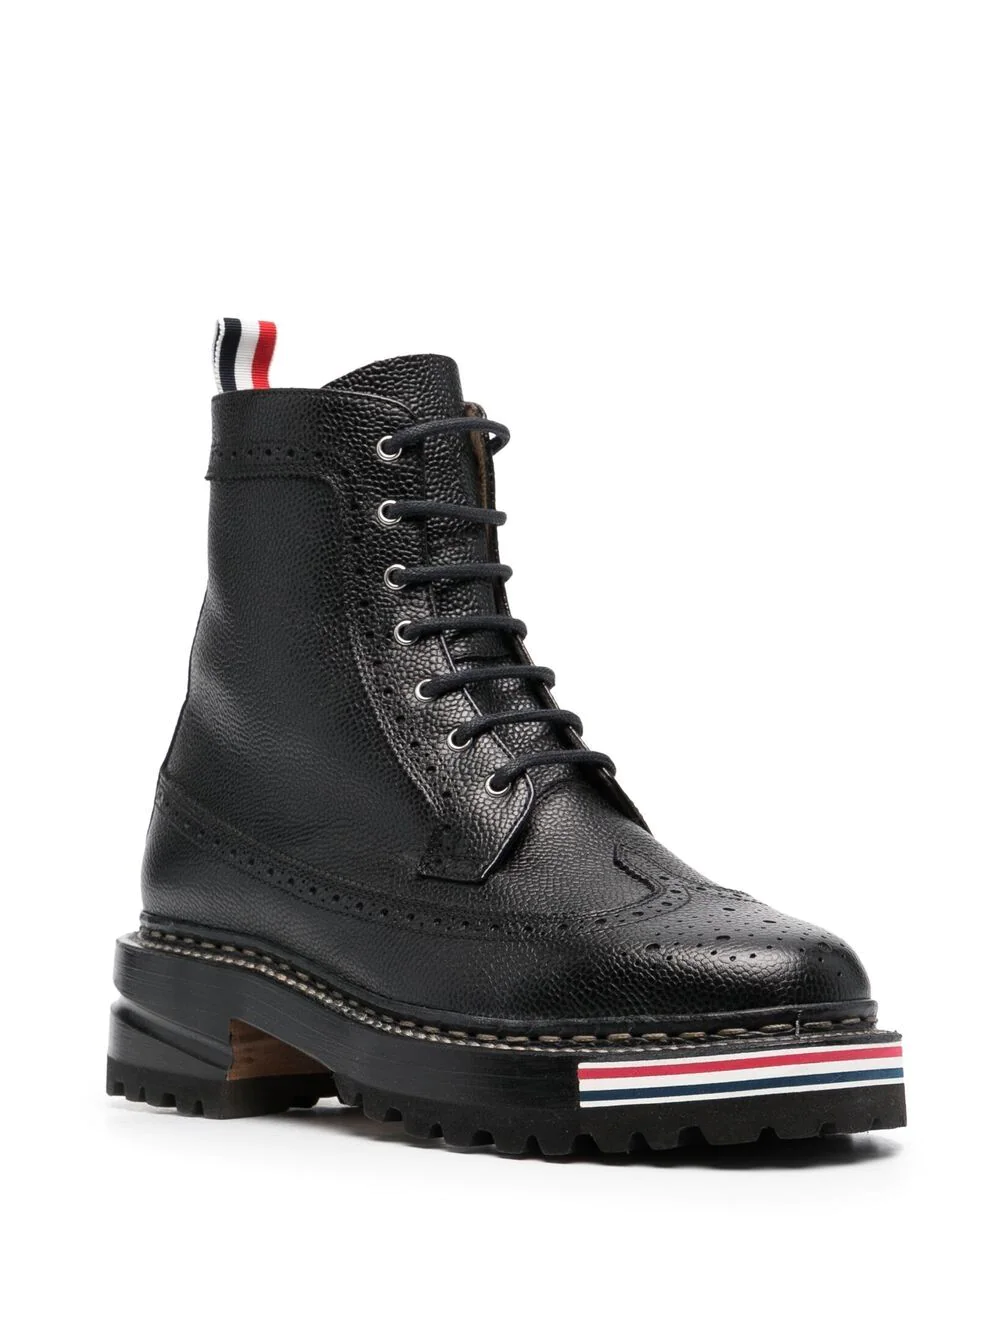 Thom-Browne-Laceup-Longwing-Boot-On-Rubber-Black-2